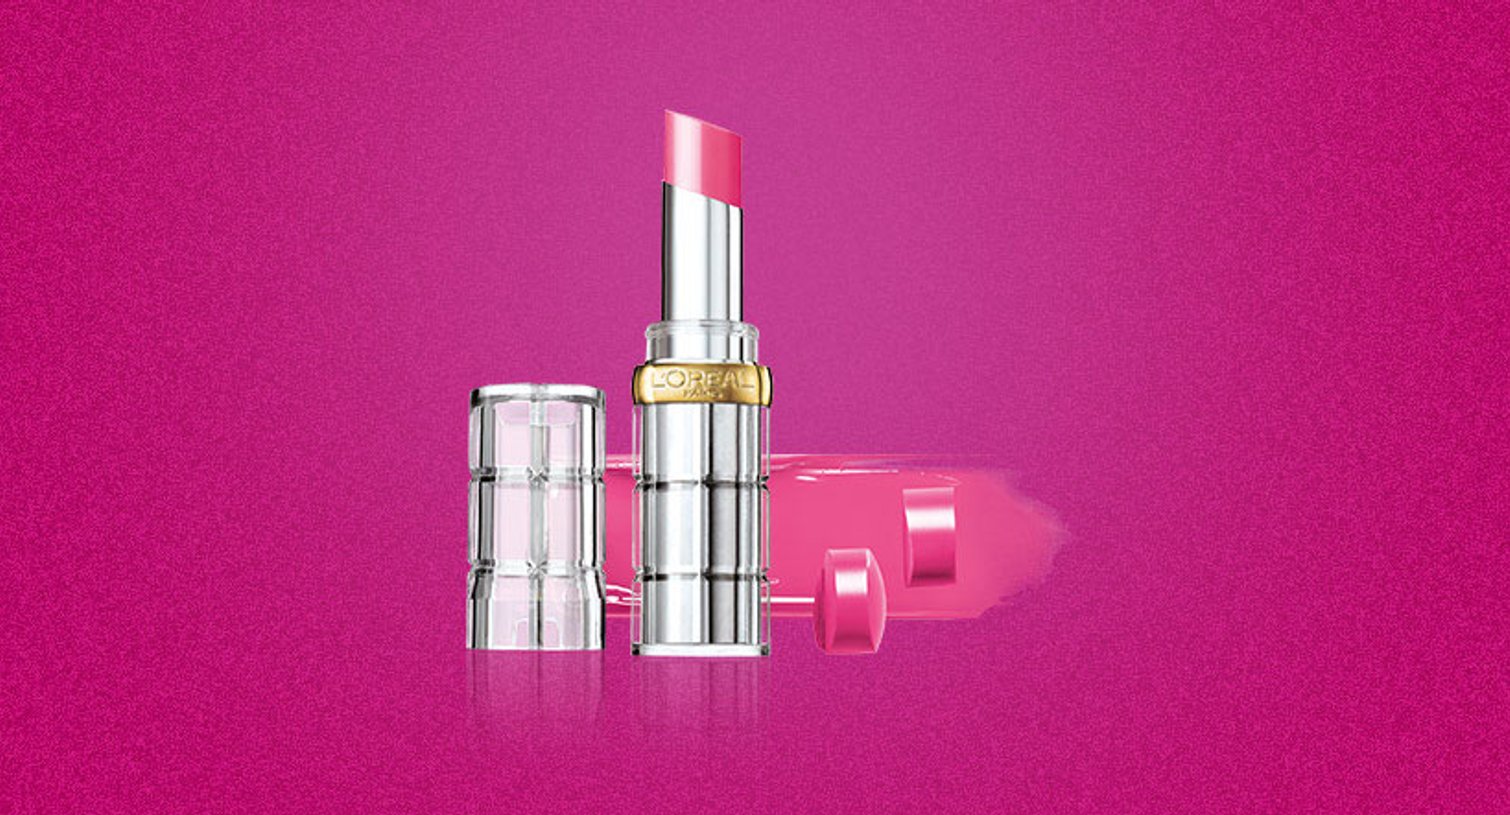 Loreal Paris BMAG Slideshow Our 20 Best Pink Lipsticks for Every Skin Tone Slide7